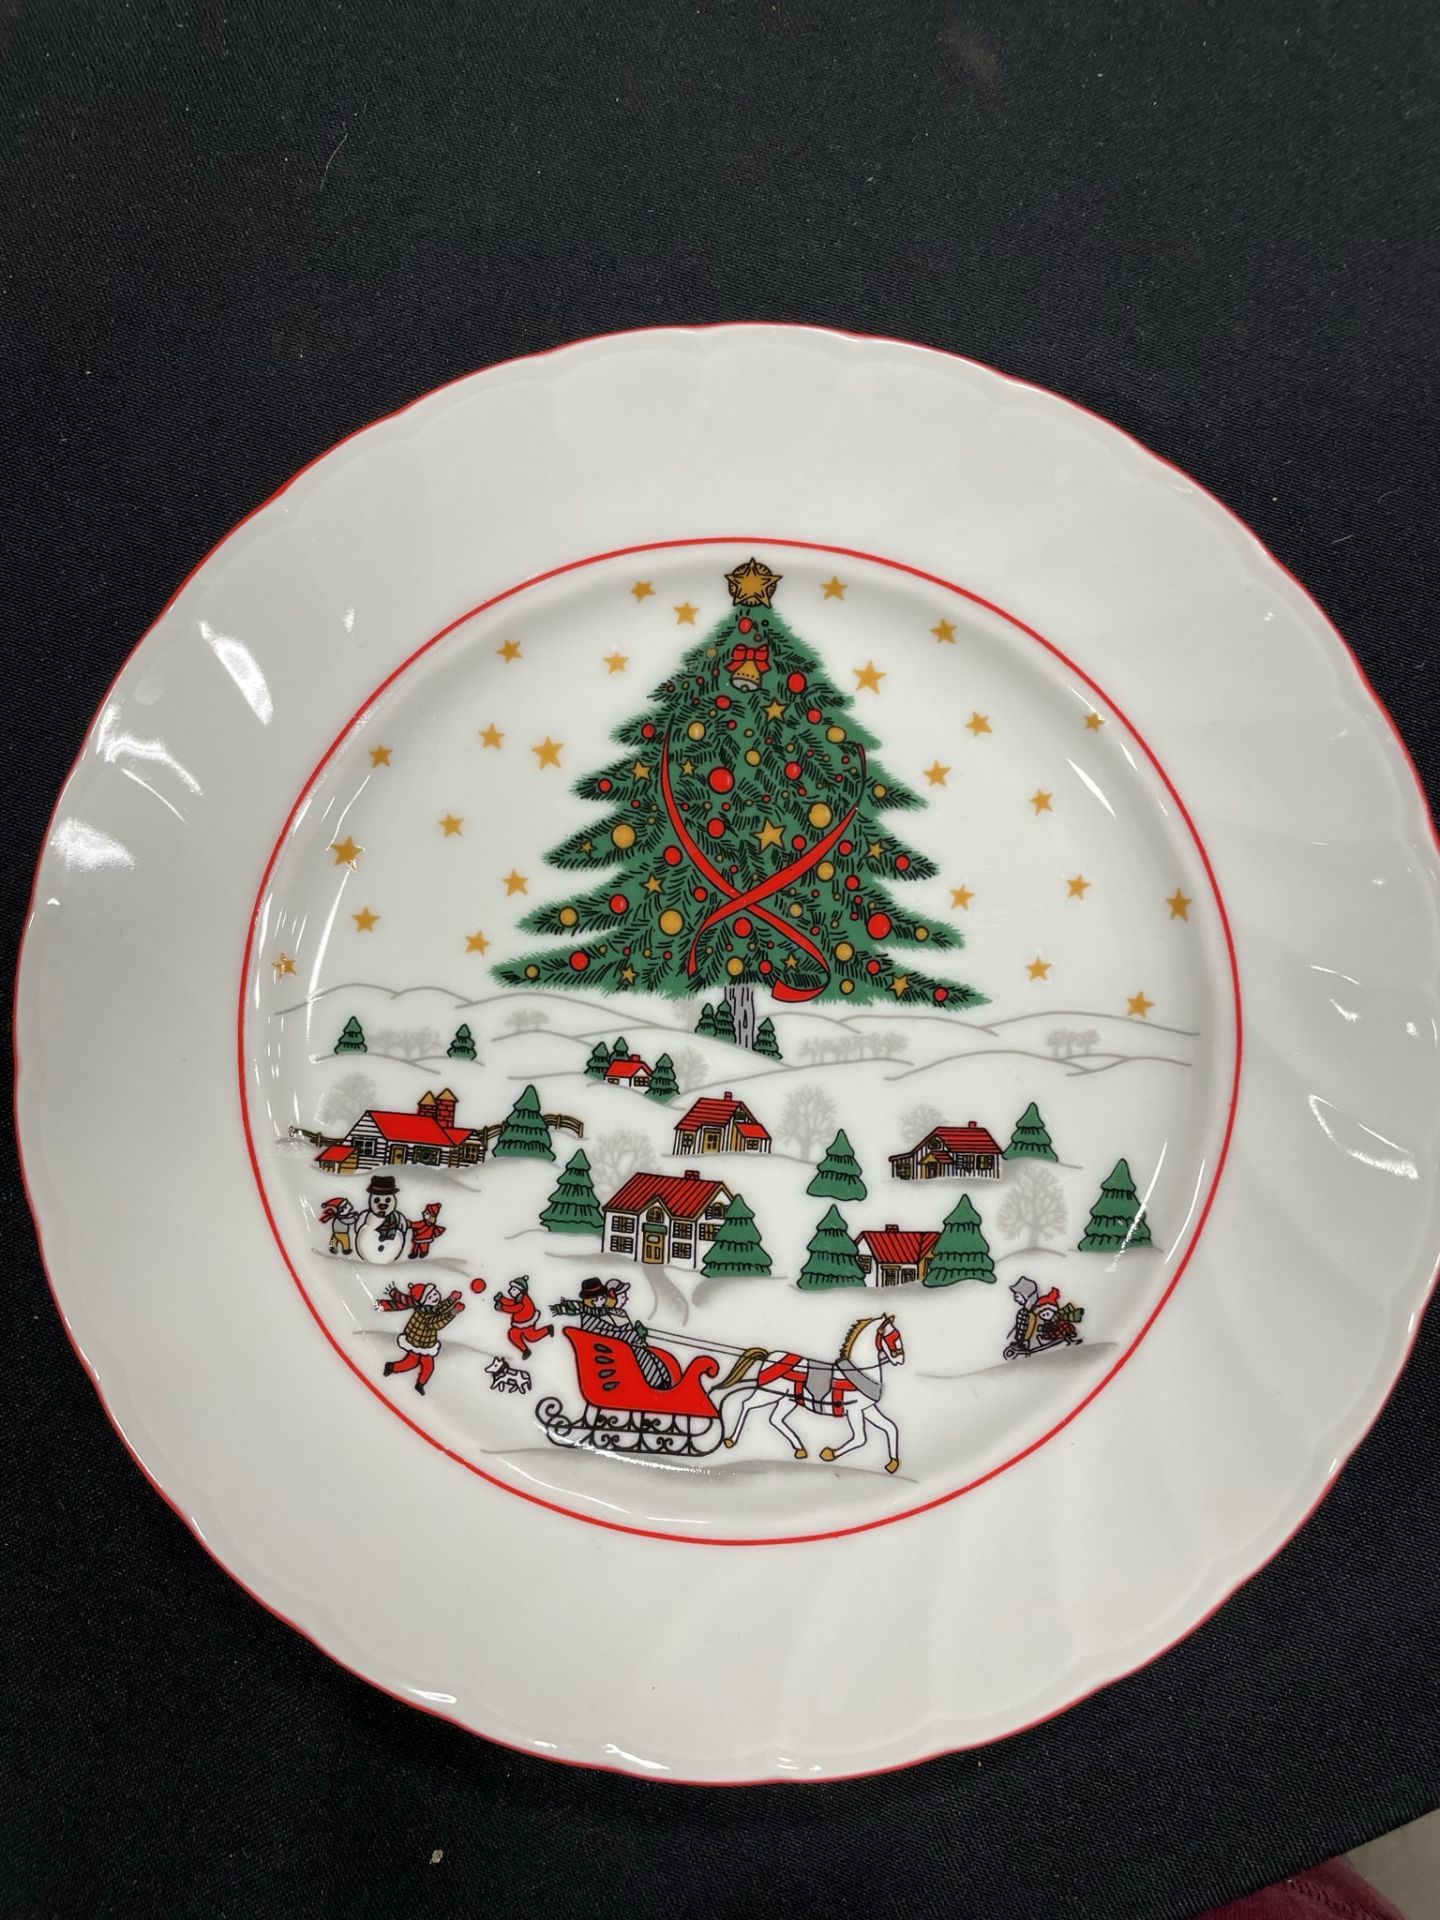 CHRISTMAS THEMED DISHES, TEA CUPS, SAUCERS, BOWLS, ETC. - Image 2 of 3